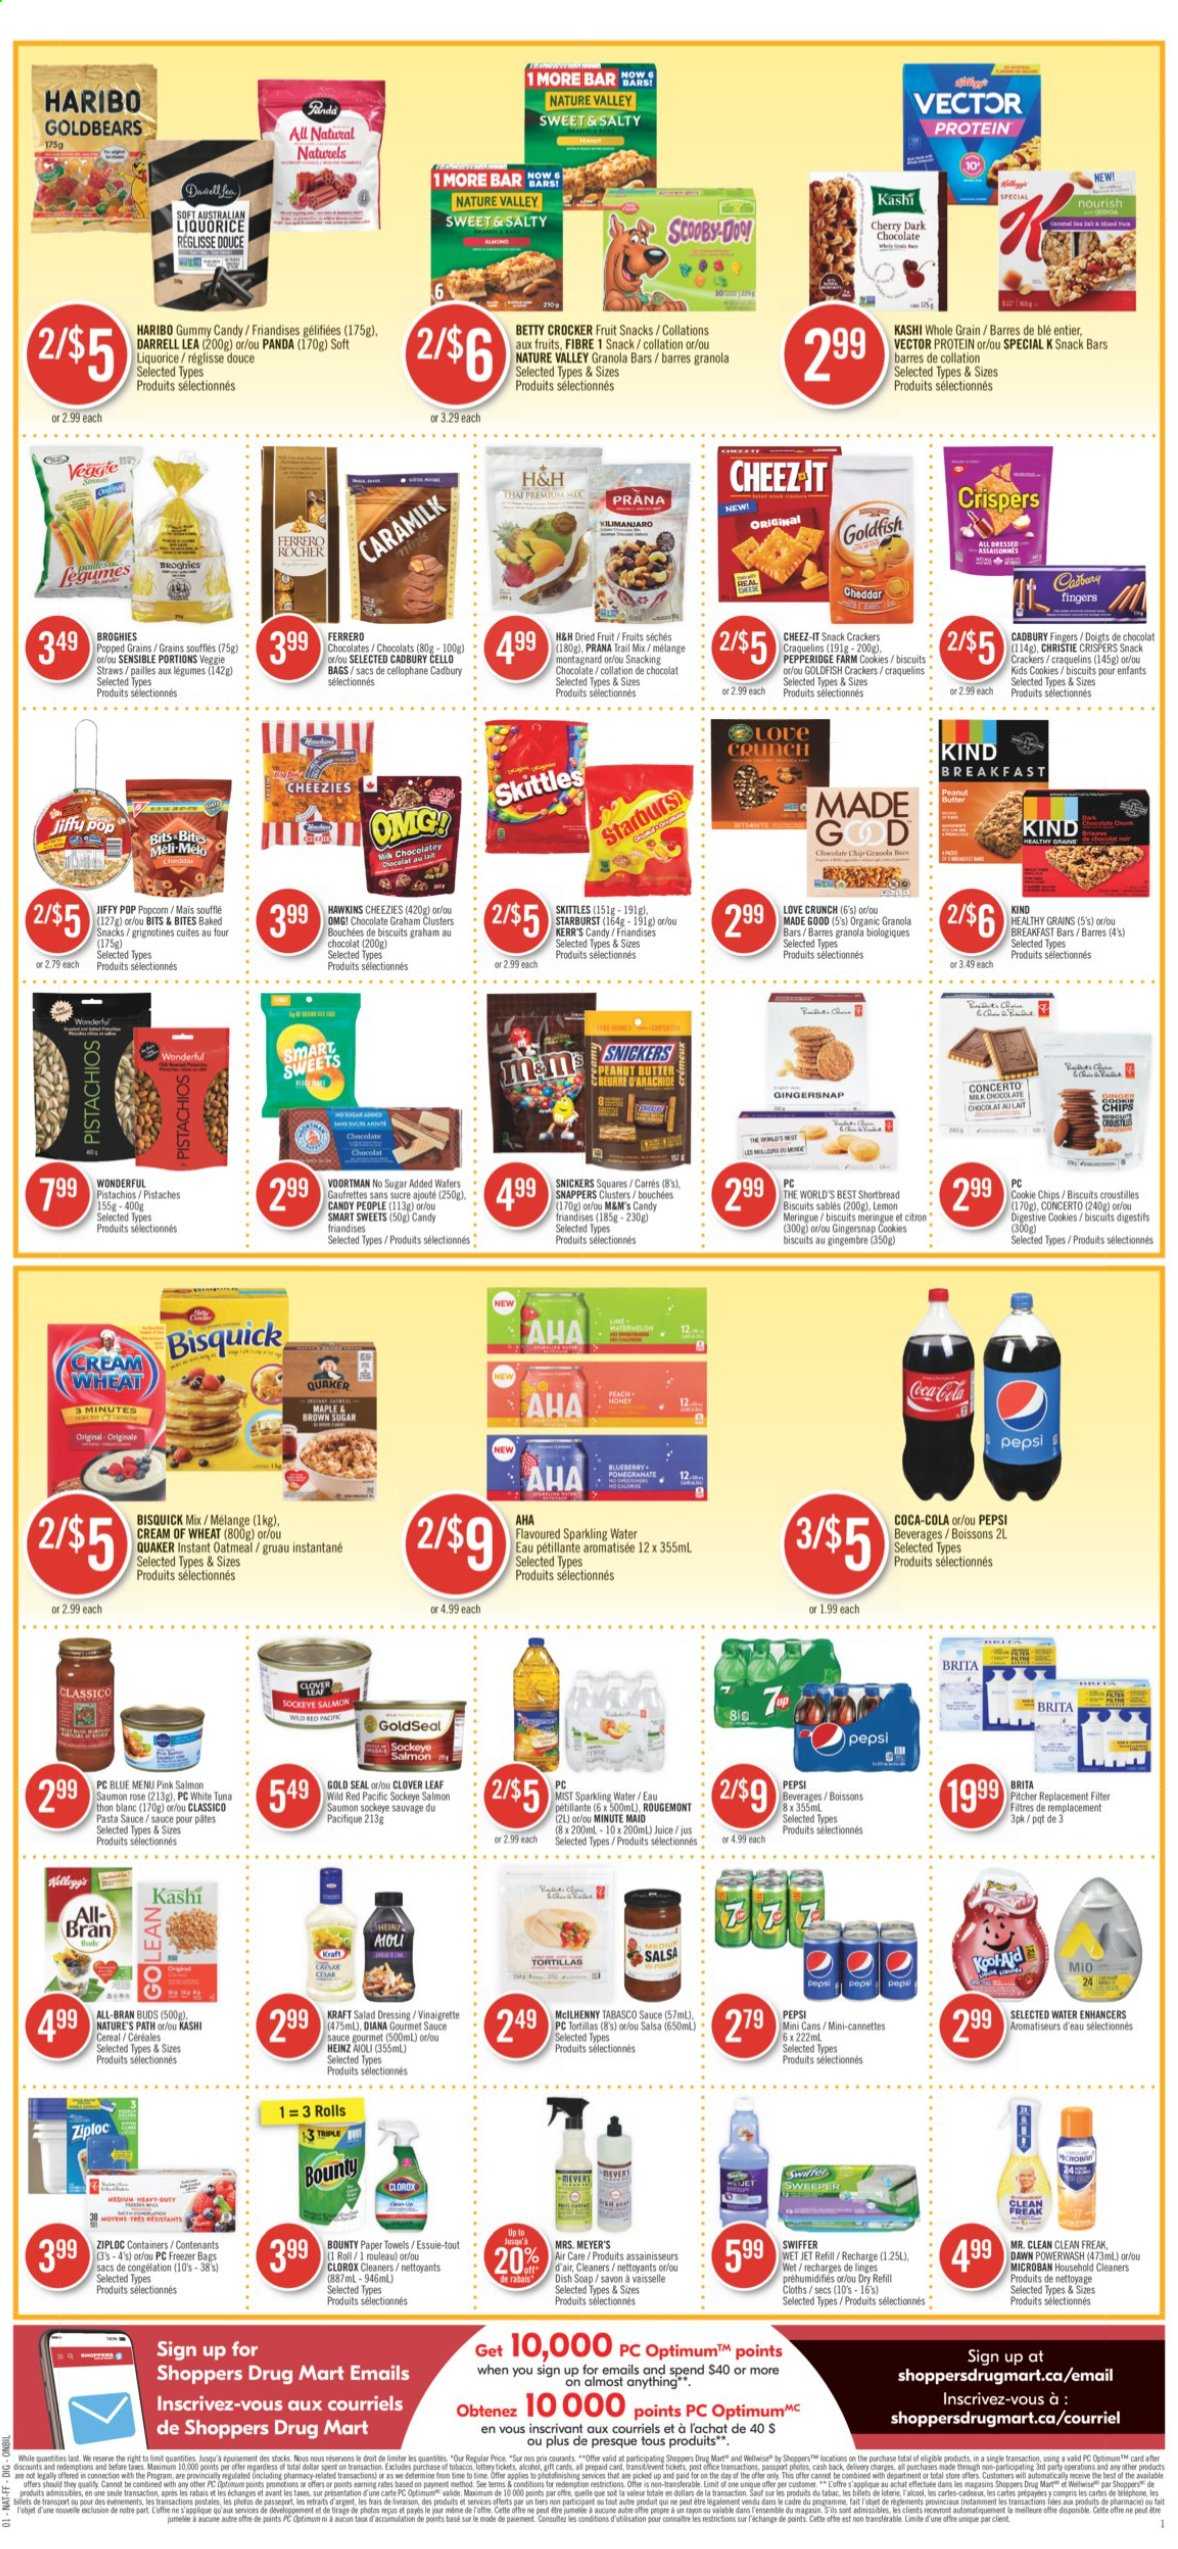 thumbnail - Shoppers Drug Mart Flyer - July 17, 2021 - July 23, 2021 - Sales products - cookies, wafers, chocolate, Haribo, Snickers, Bounty, crackers, biscuit, dark chocolate, Cadbury, Digestive, Skittles, fruit snack, snack bar, Starburst, tortillas, Goldfish, Veggie Straws, Cheez-It, Bisquick, tabasco, oatmeal, salmon, Heinz, pasta sauce, cereals, Cream of Wheat, granola bar, Quaker, Nature Valley, All-Bran, salad dressing, vinaigrette dressing, dressing, salsa, Classico, Kraft®, dried fruit, pistachios, trail mix, Coca-Cola, Pepsi, juice, Clover, fruit punch, kitchen towels, paper towels, Clorox, Swiffer, Jet, soap, Ziploc, tuna, chips, M&M's. Page 6.